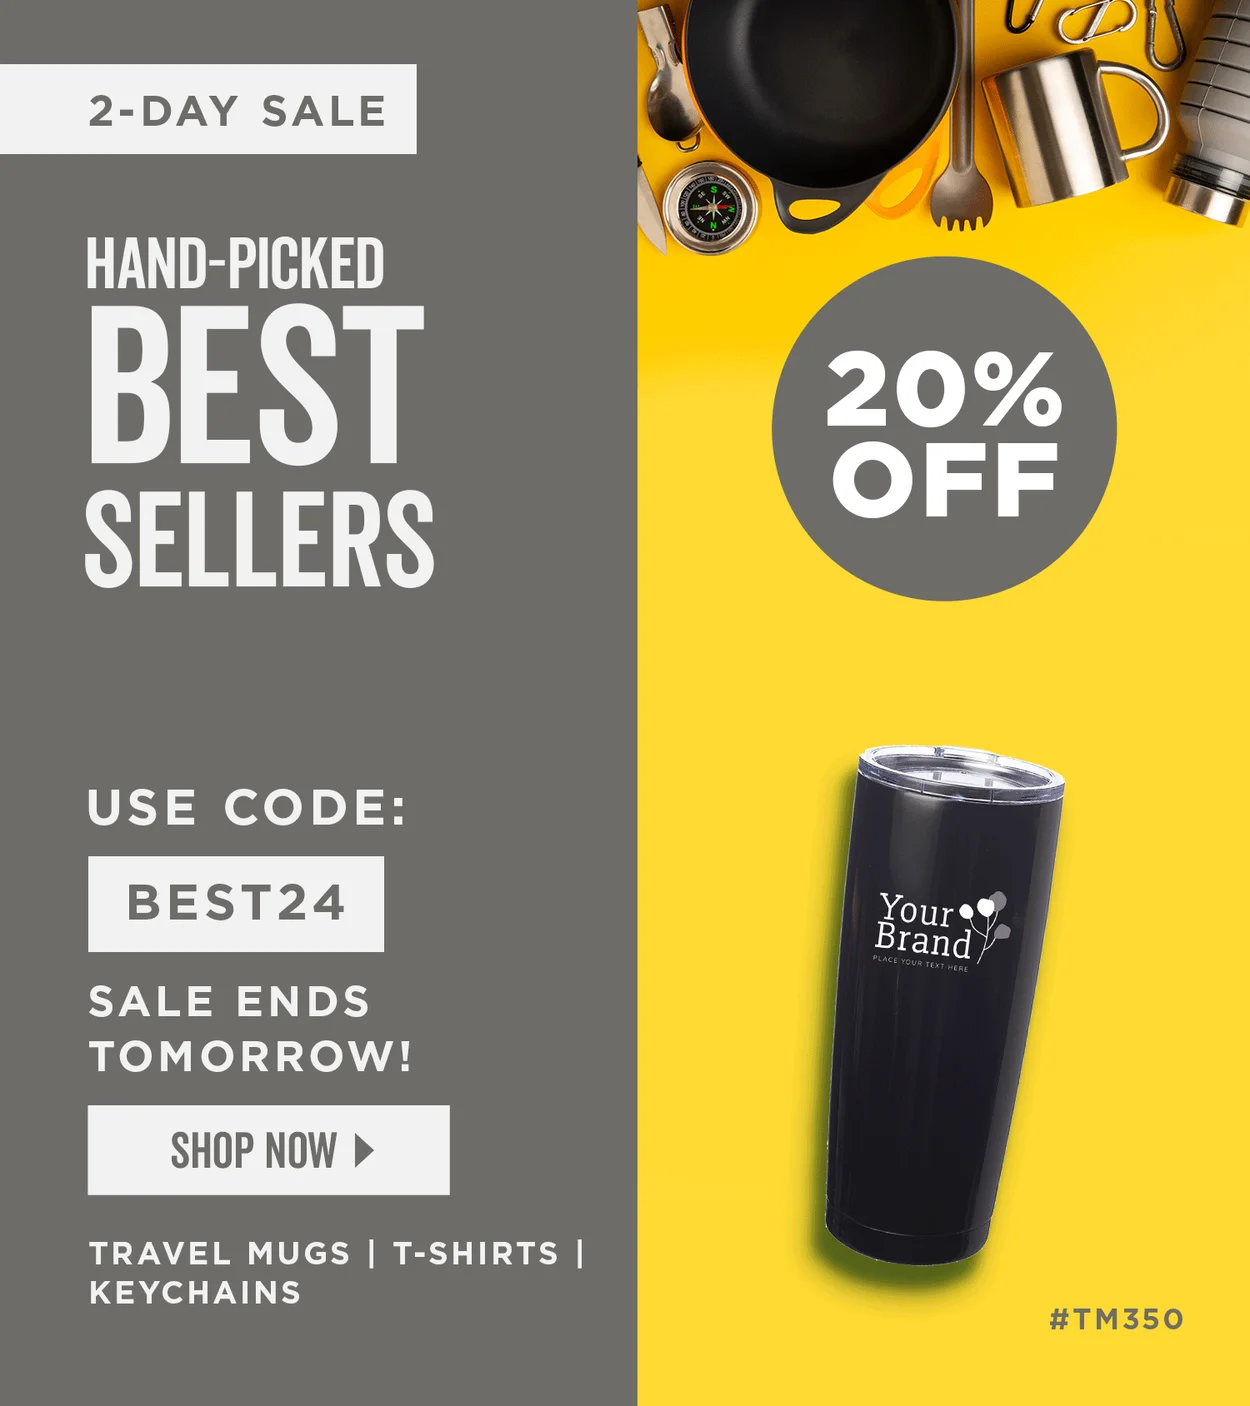 Hand-Picked Best Sellers | 20% Off | Use Code: BEST24 | Shop Now | Discount applied to travel mugs, t-shirts and key chains.